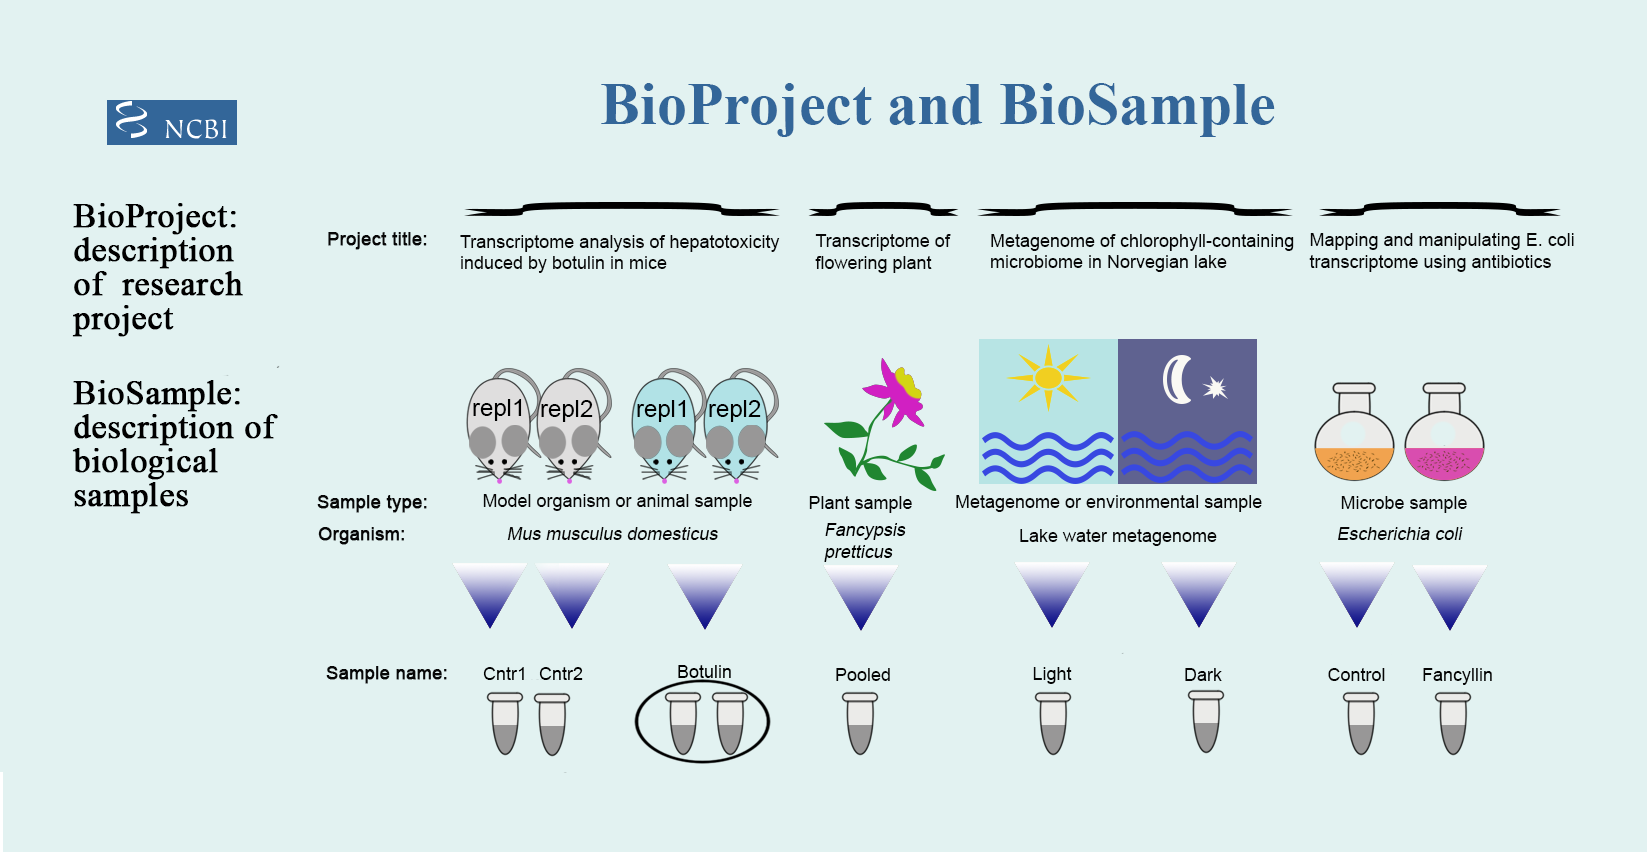 Figure 1: Overview of the distinction between BioProjects and BioSamples